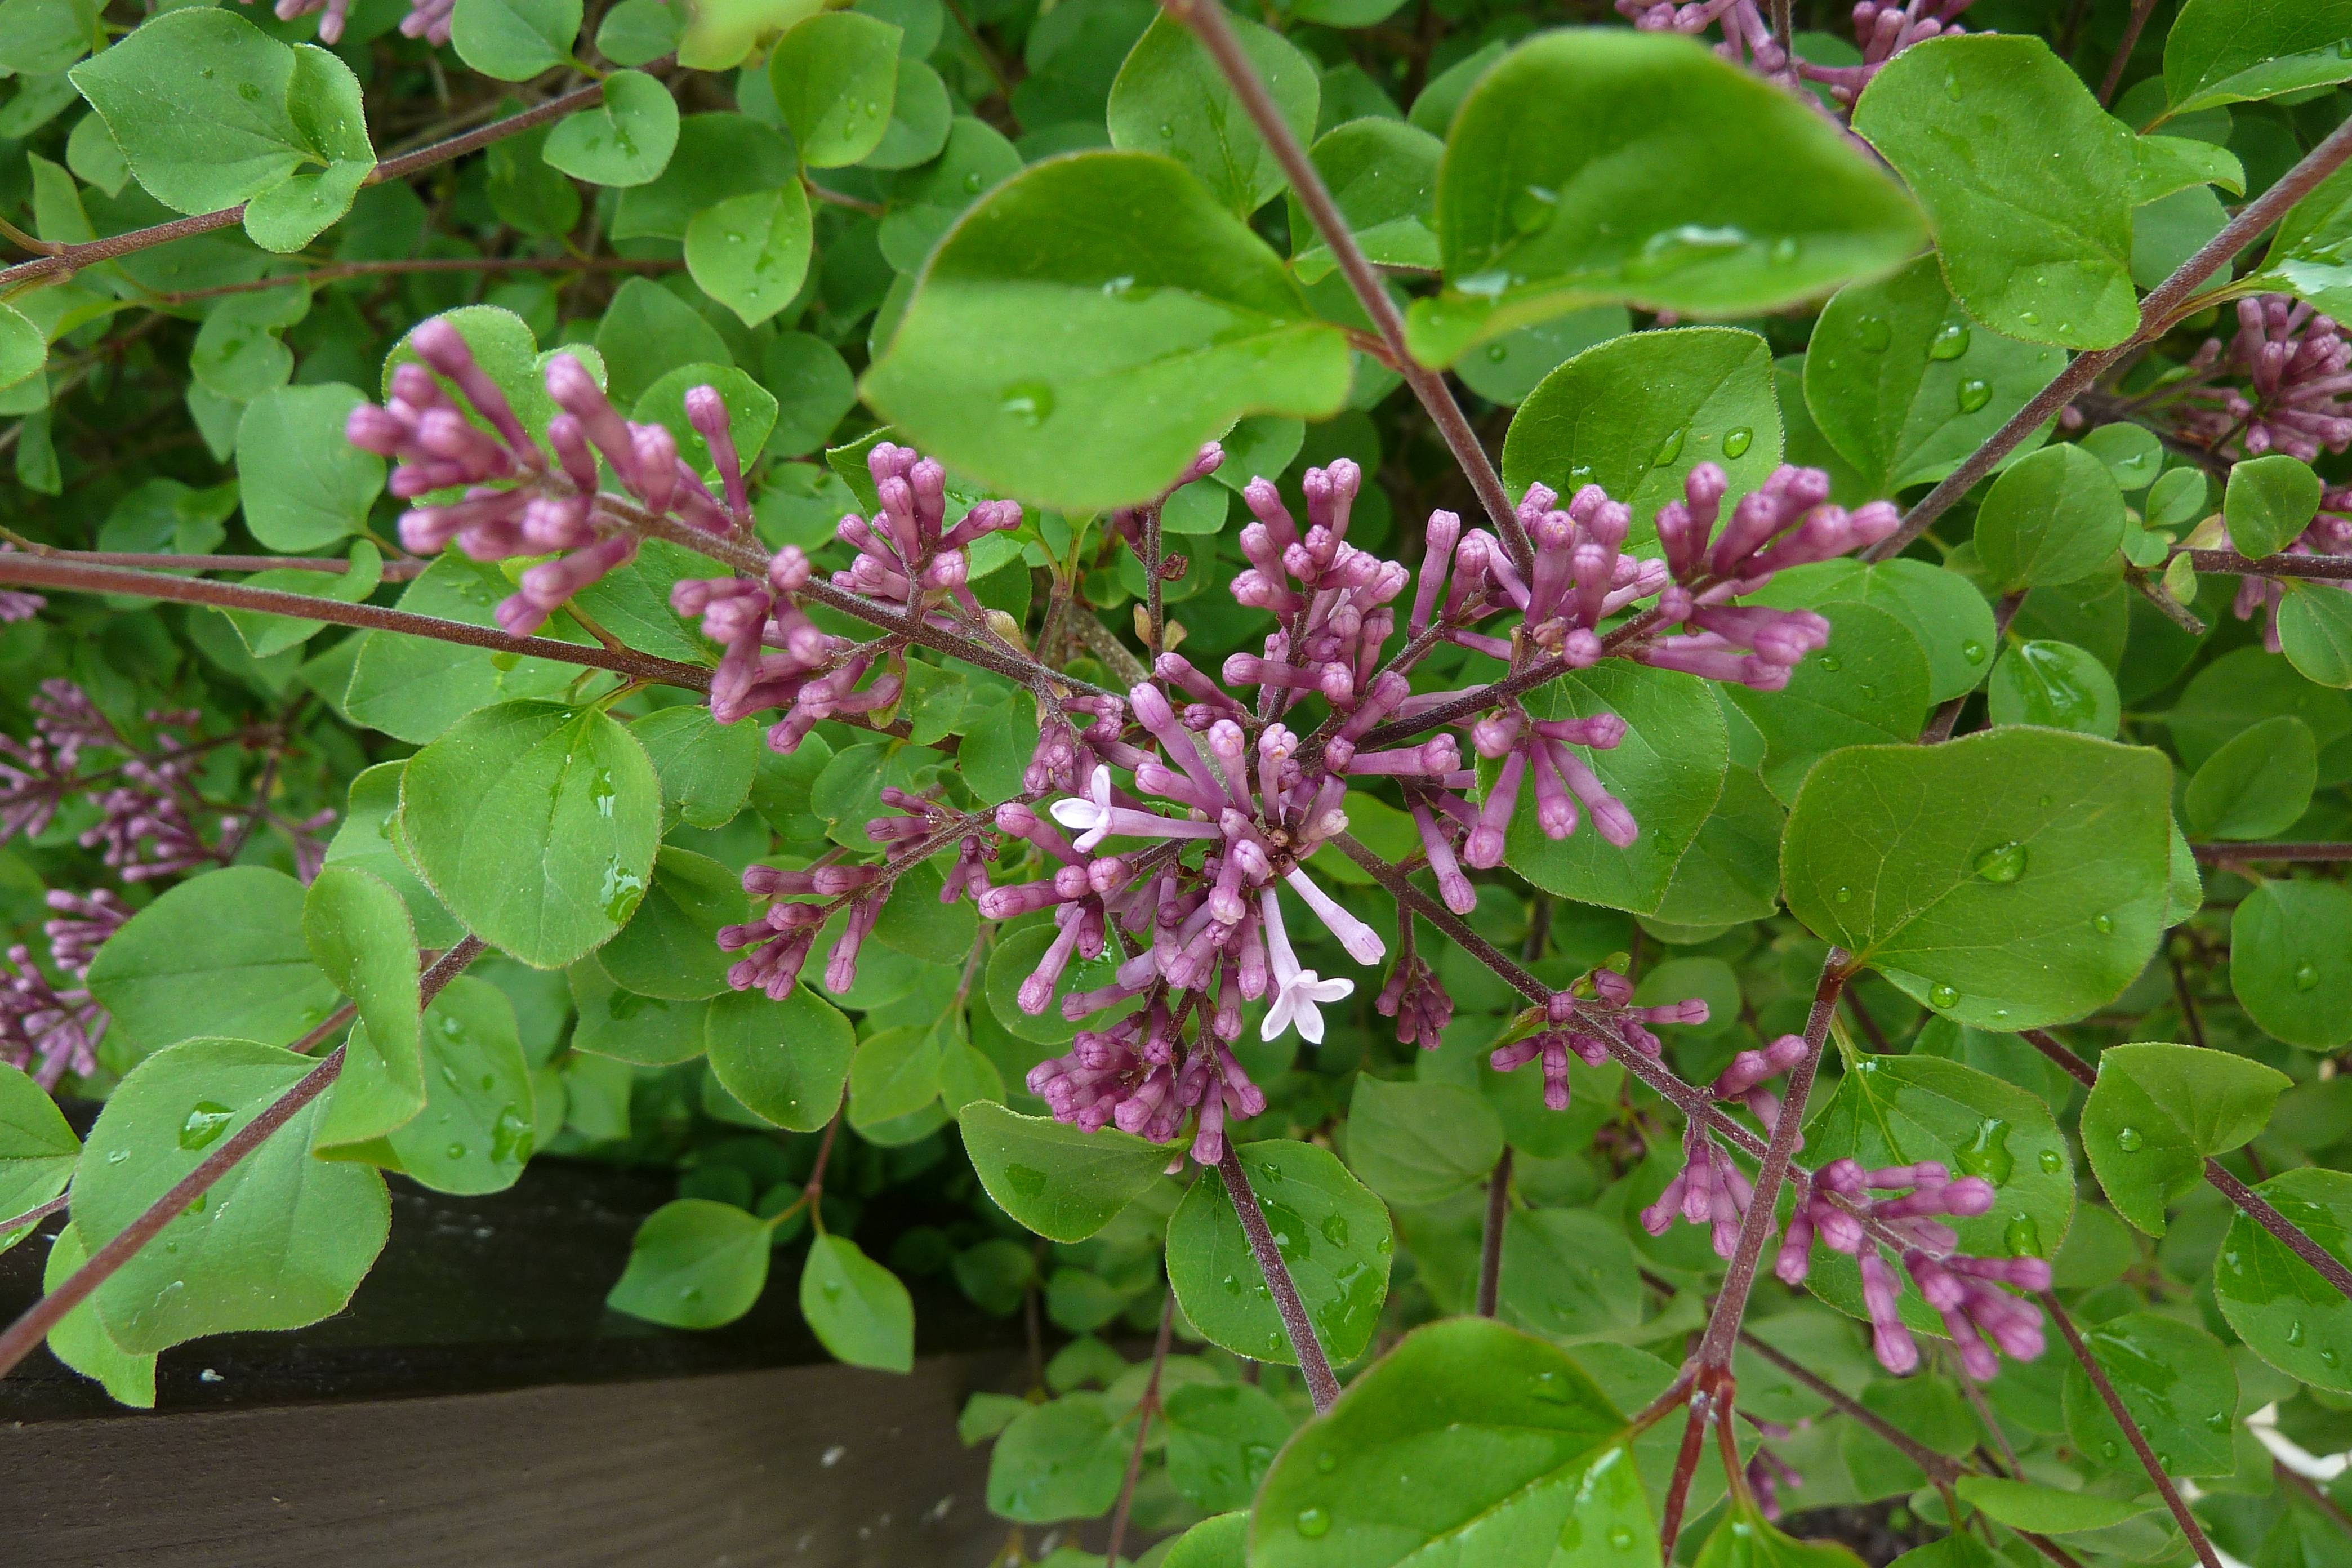 pink-purple flowers with green leaves and burgundy stems
